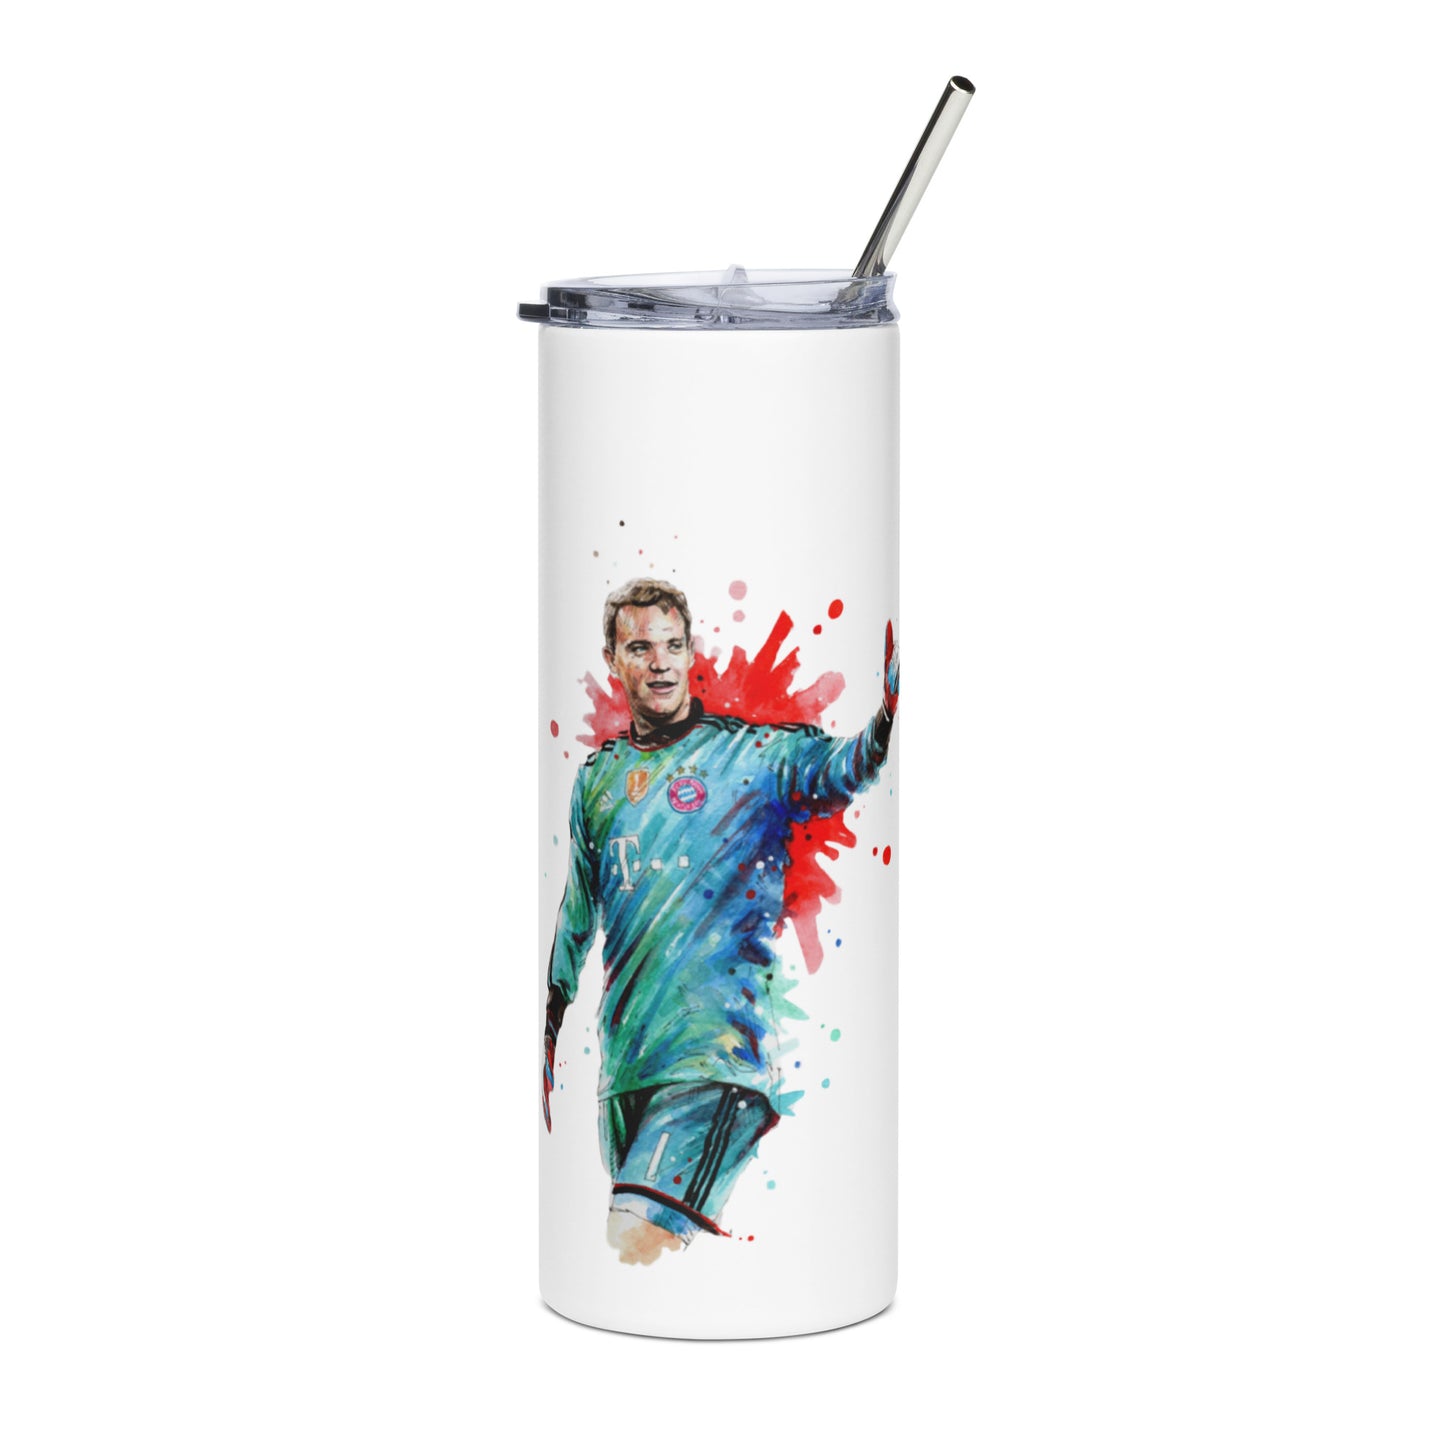 Bayern Neuer Vintage Stainless steel tumbler - The 90+ Minute